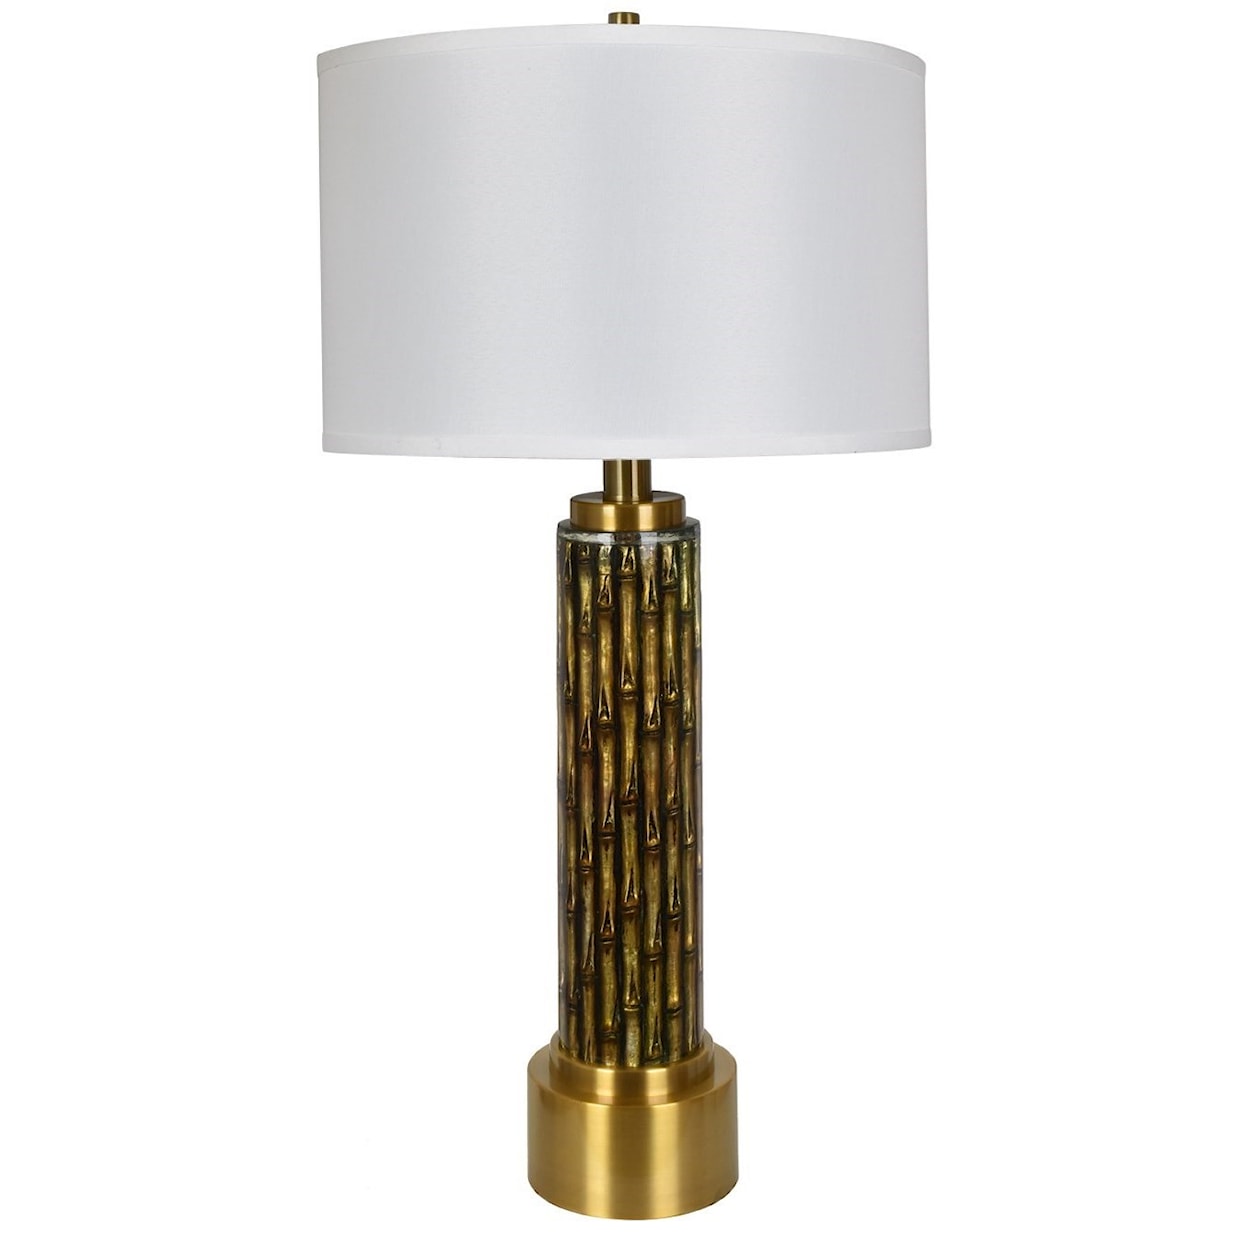 Crestview Collection Lighting Bamboo Table Lamp